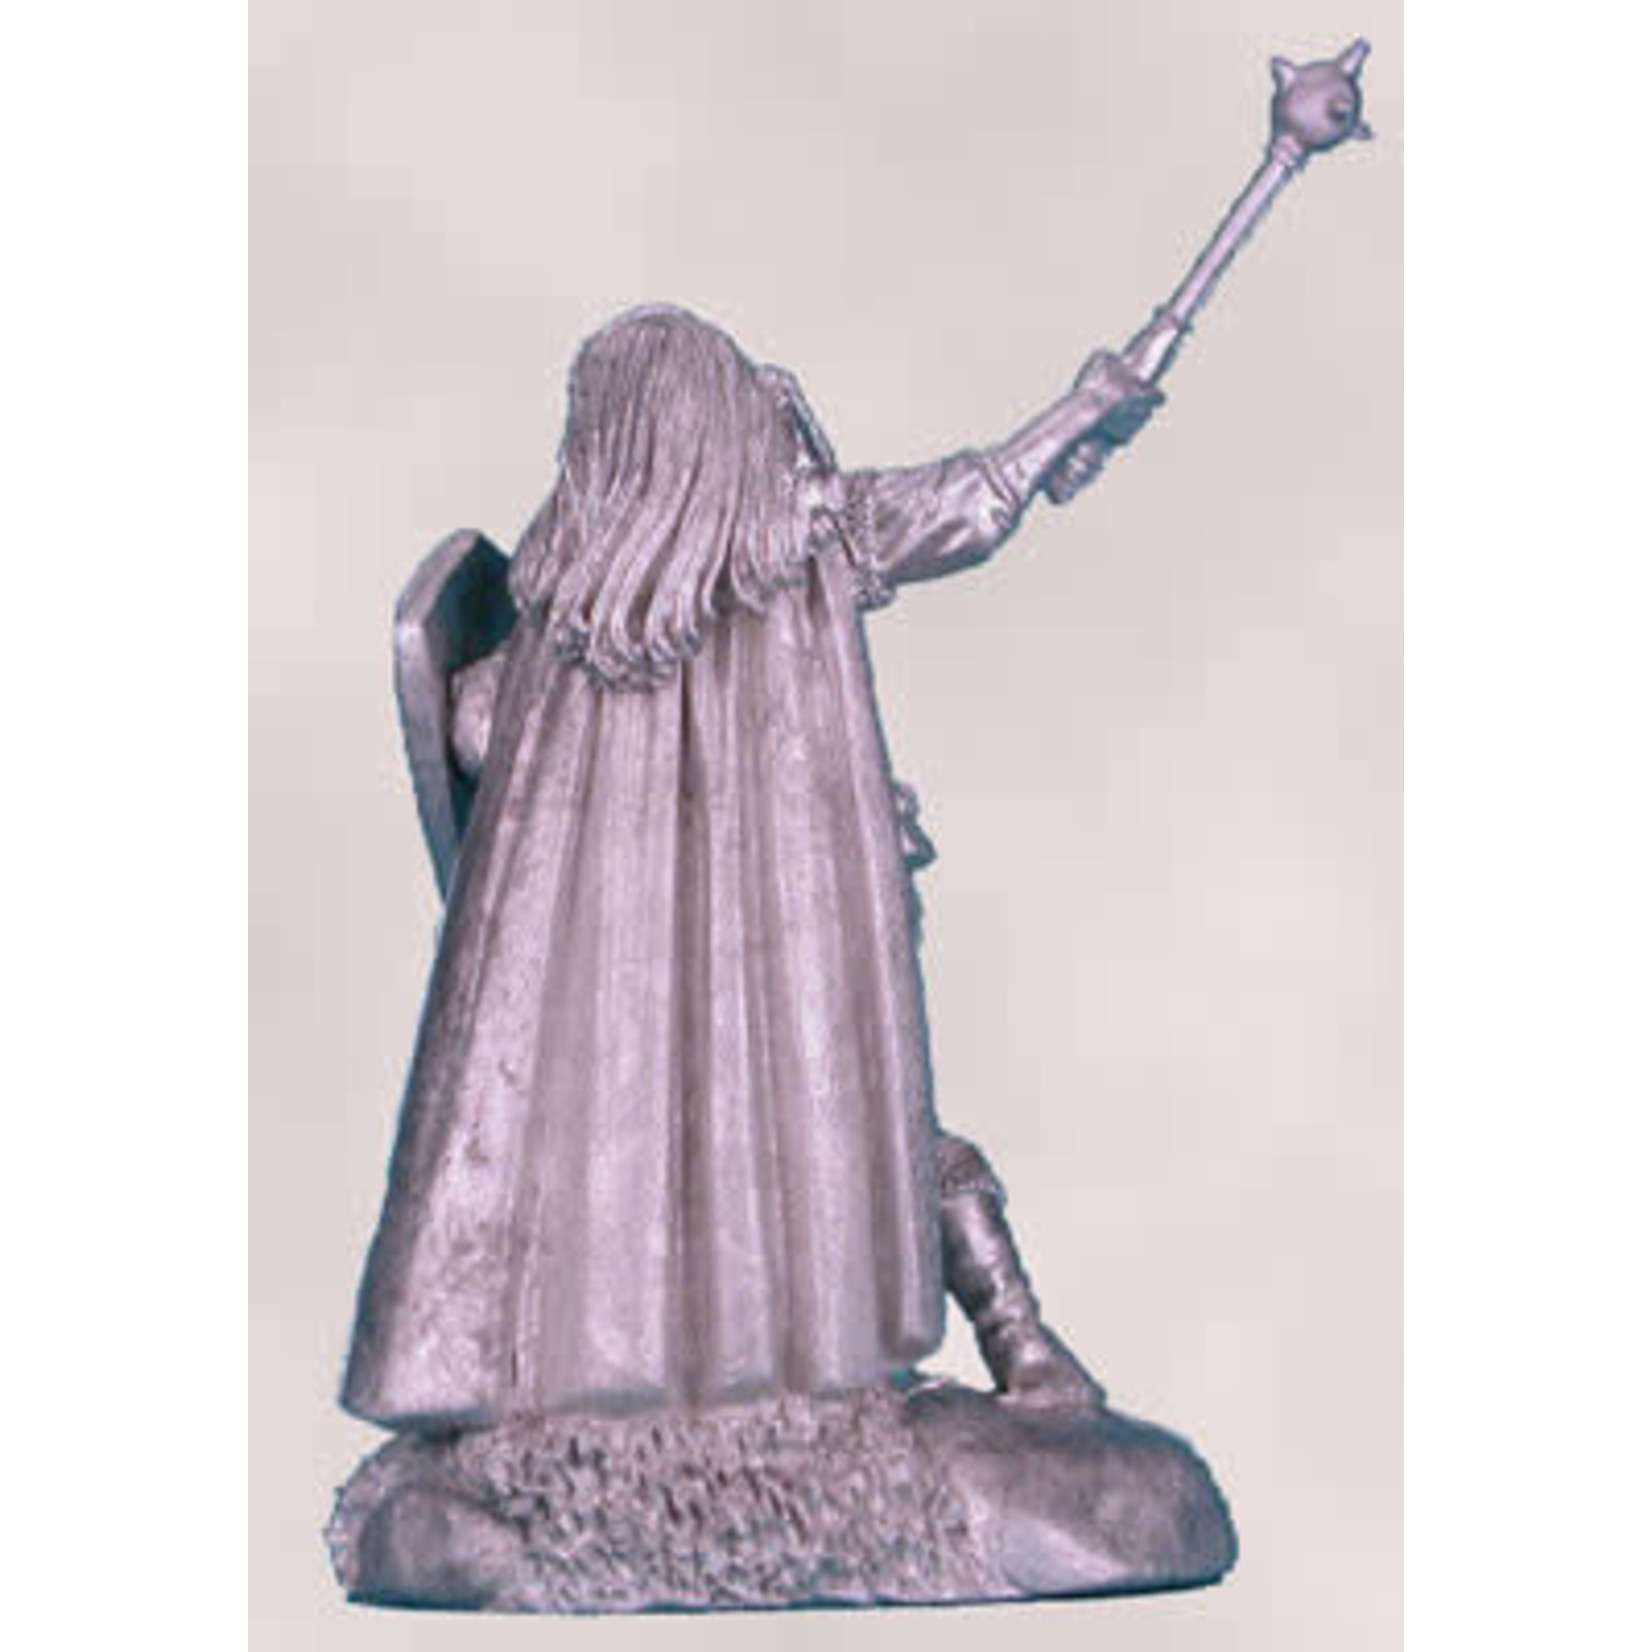 Dark Sword Miniatures Dark Sword Miniatures (Metal) Elmore Masterworks - Avalyn the Life Giver Female Cleric with Mace (1)